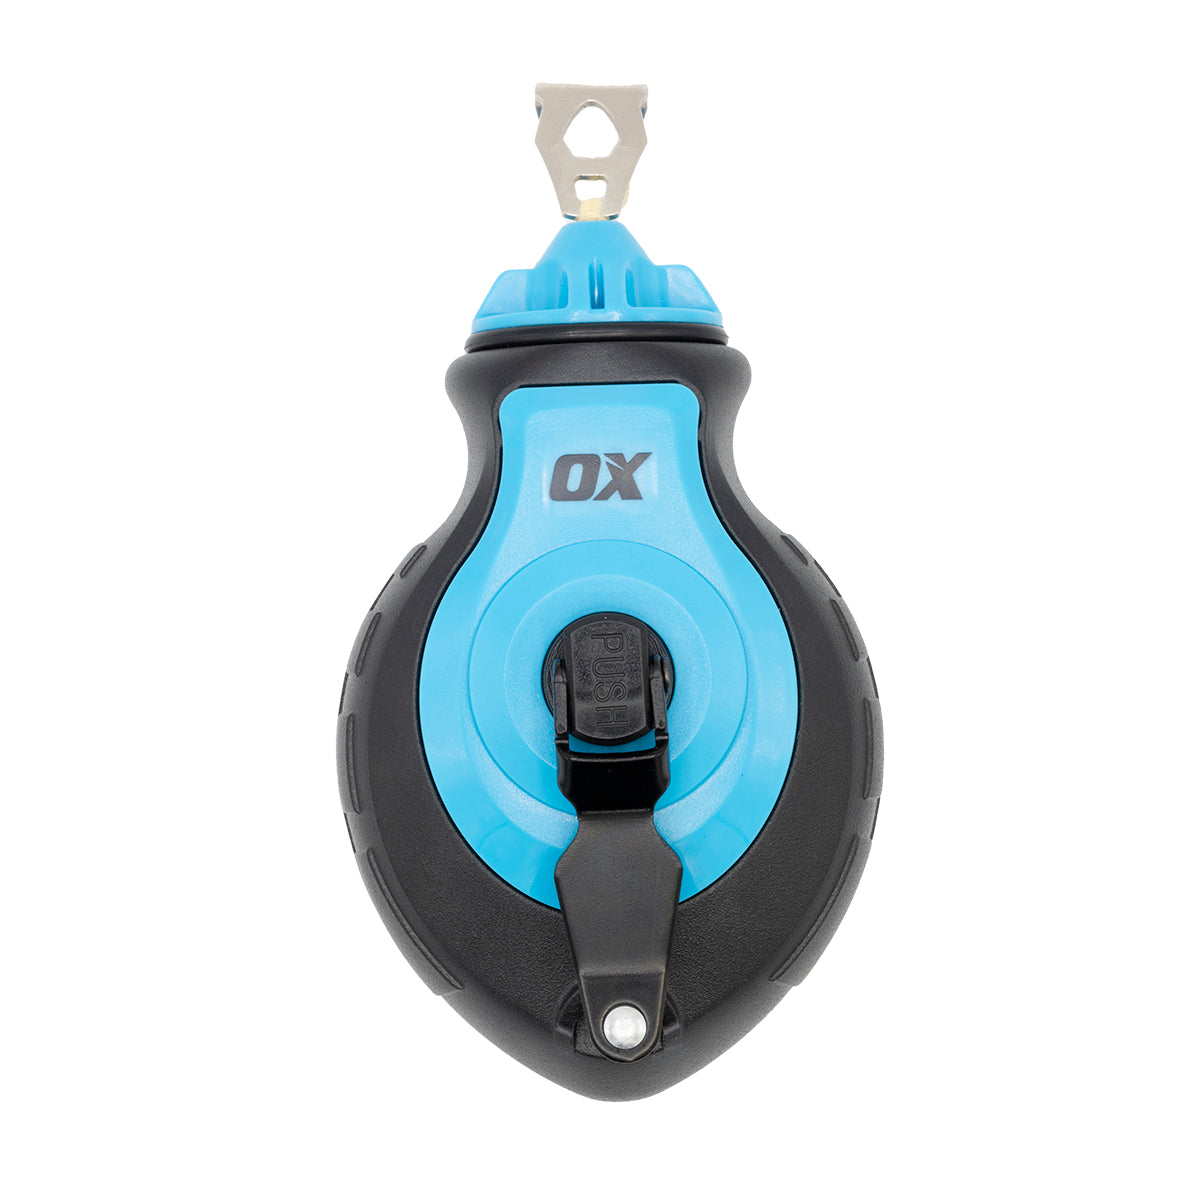 OX Pro Aluminum Body Chalk Reel with Kevlar Reinforced Line – 6:1 Gear Ratio - OX Tools